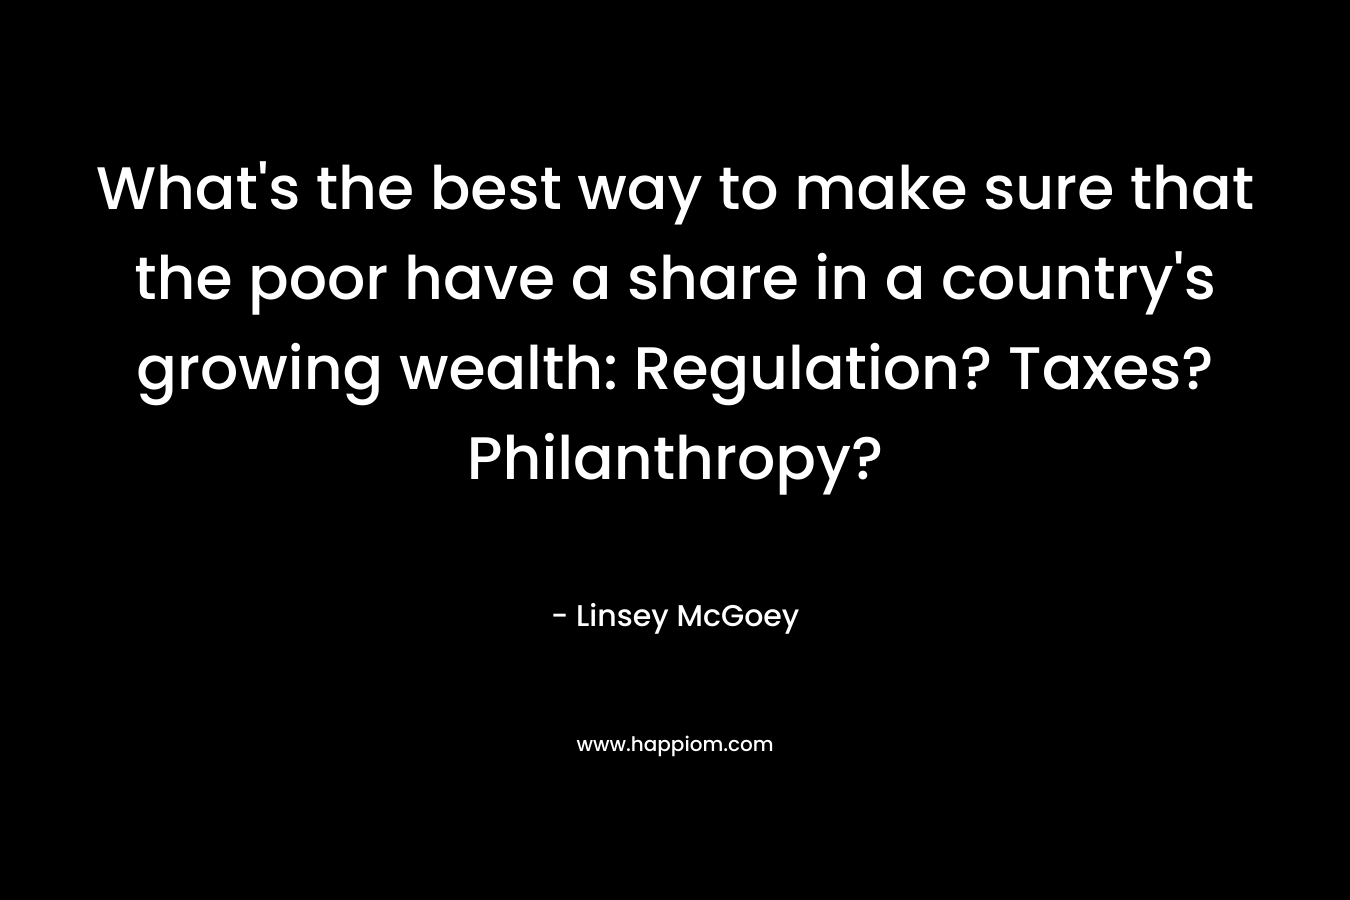 What’s the best way to make sure that the poor have a share in a country’s growing wealth: Regulation? Taxes? Philanthropy? – Linsey McGoey